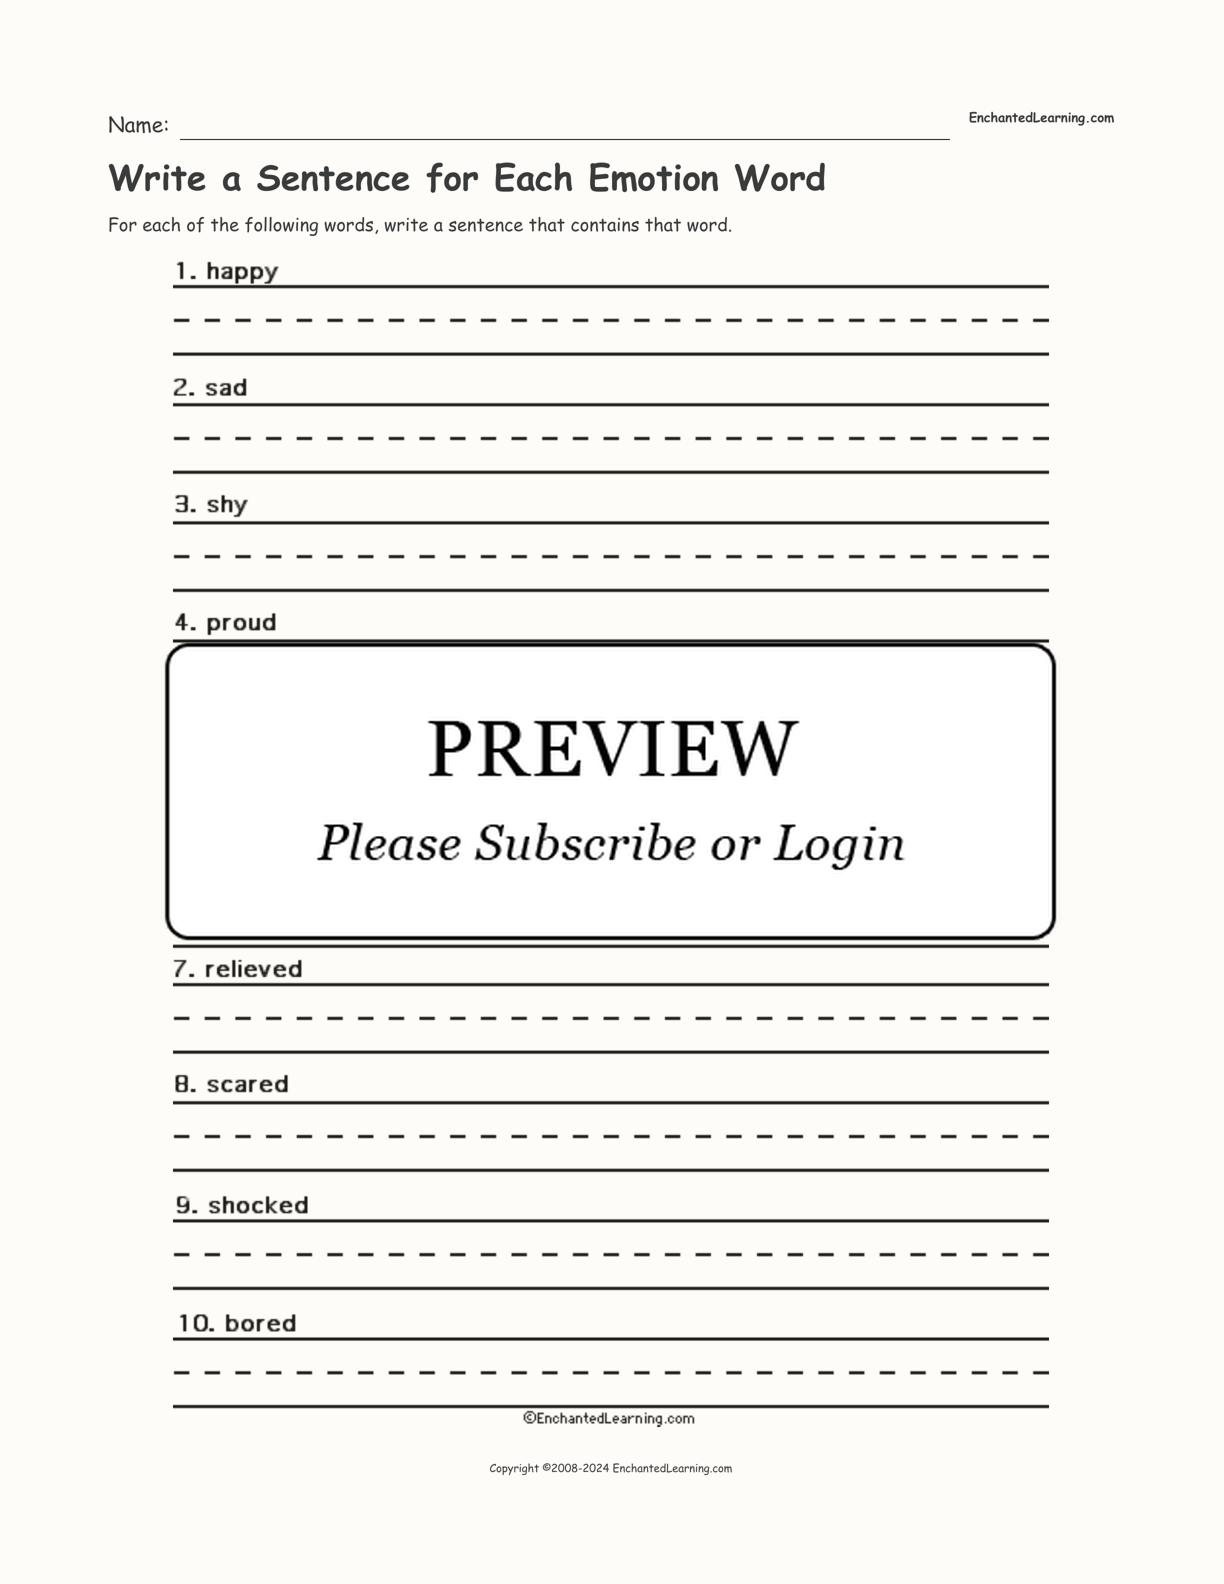 Write a Sentence for Each Emotion Word interactive worksheet page 1